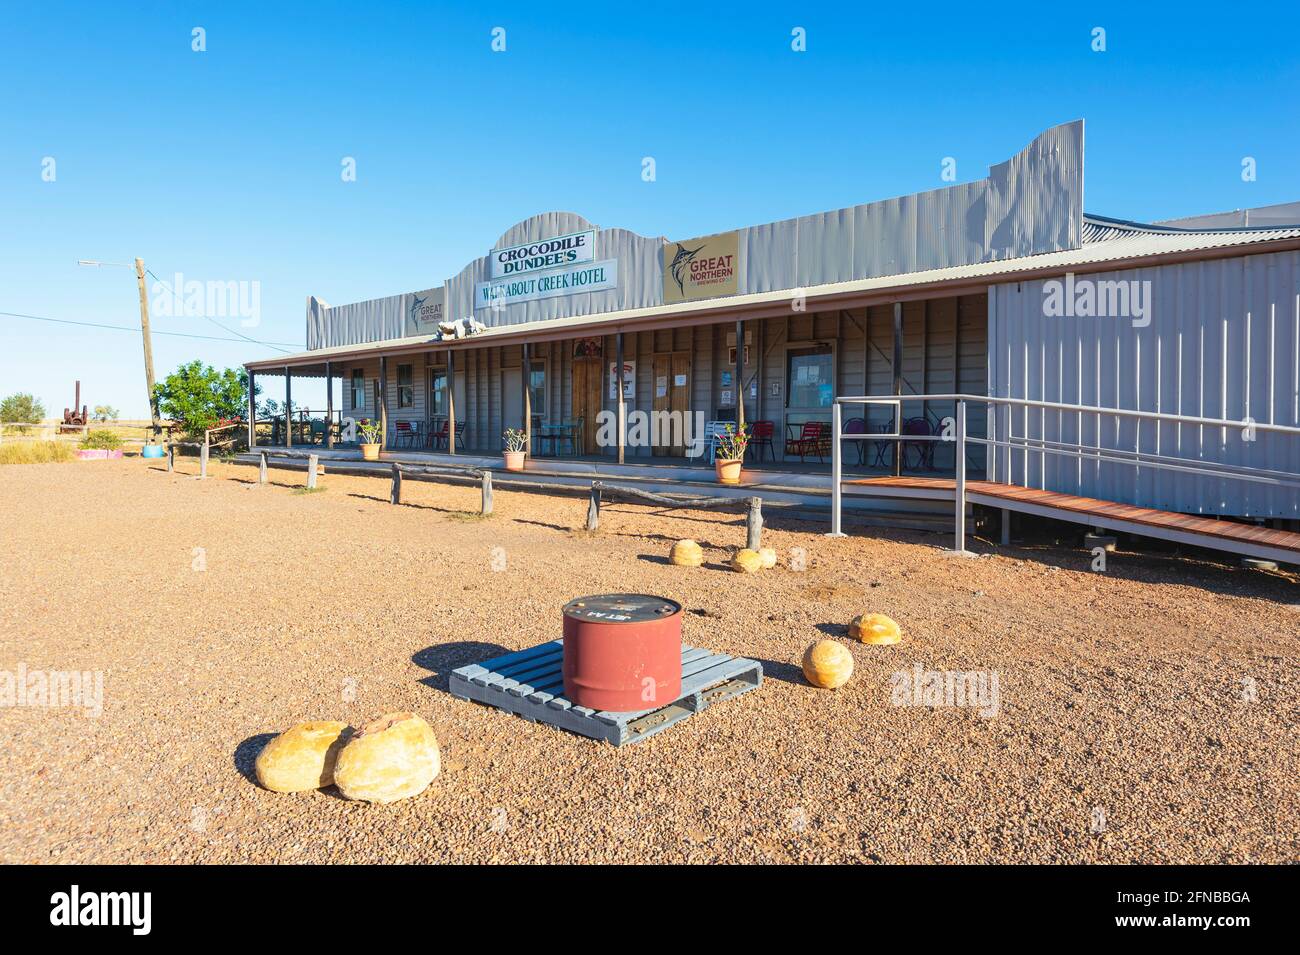 Exterior of the Walkabout Creek Hotel featured in the Crocodile Dundee's movie, McKinlay, Central Queensland, QLD, Australia. Stock Photo